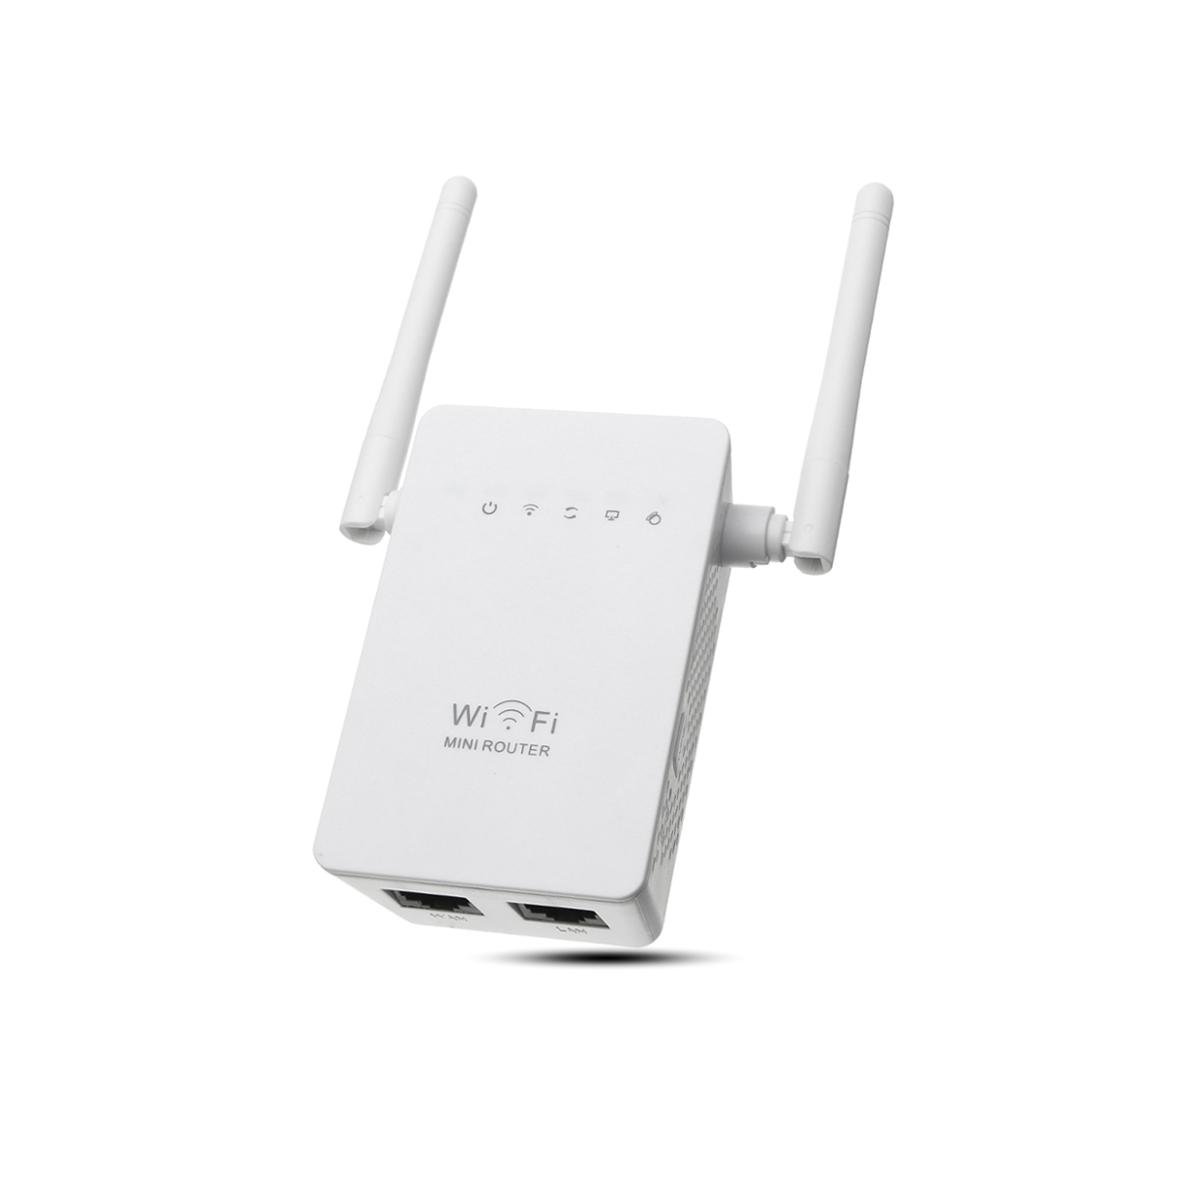 300Mbps 802.11 Dual Antennas Wireless Wifi Range Repeater Booster AP Router UK Plug 2